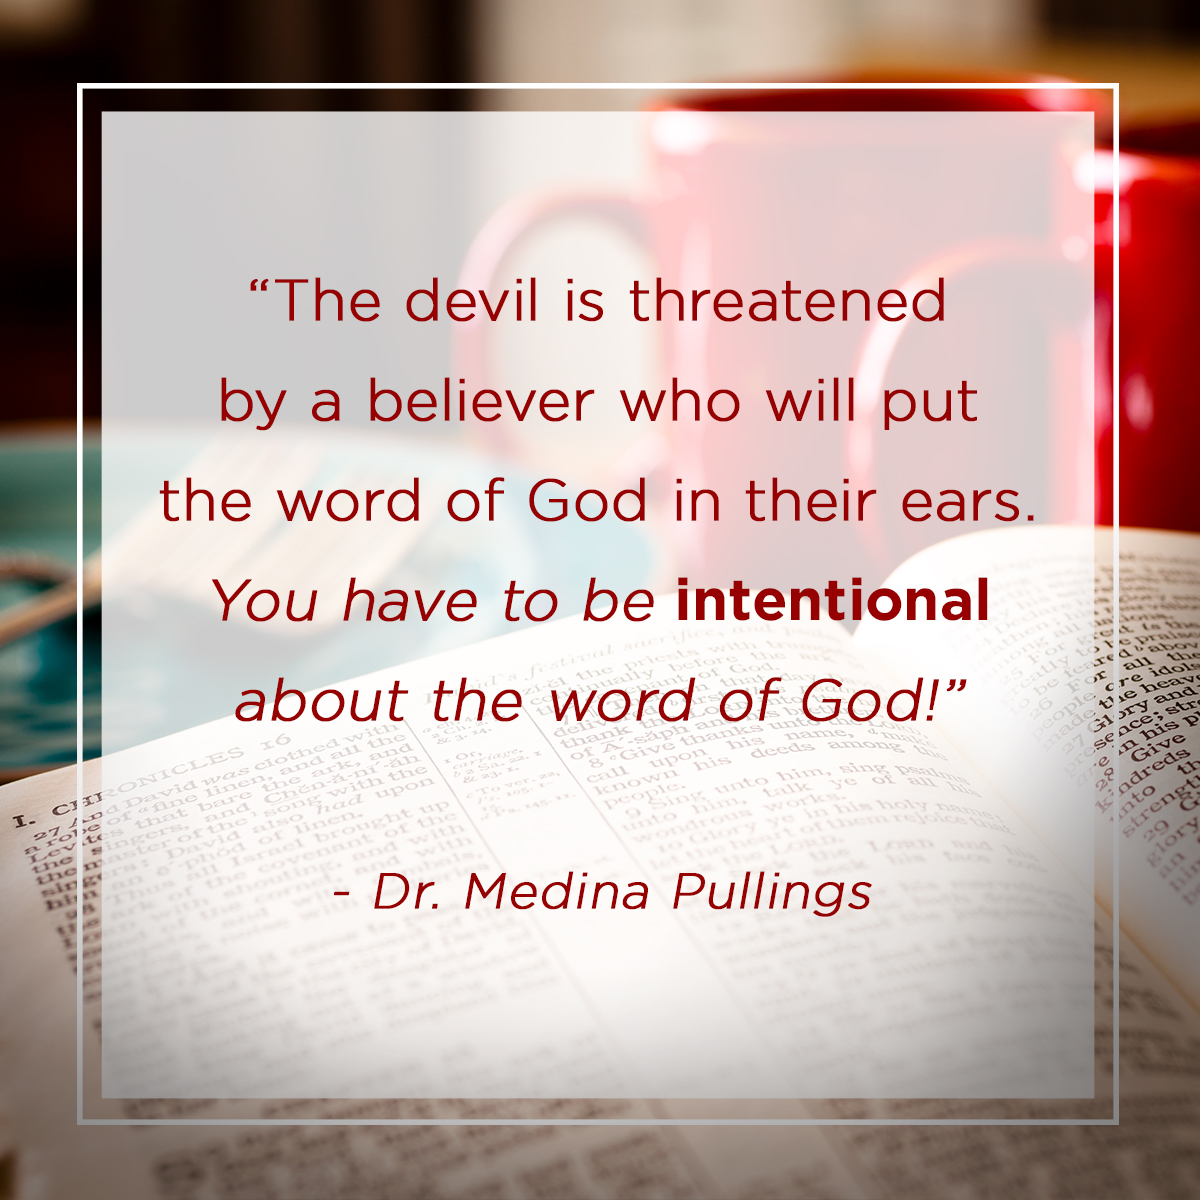 “The Book Prevails” – Dr. Medina Pullings